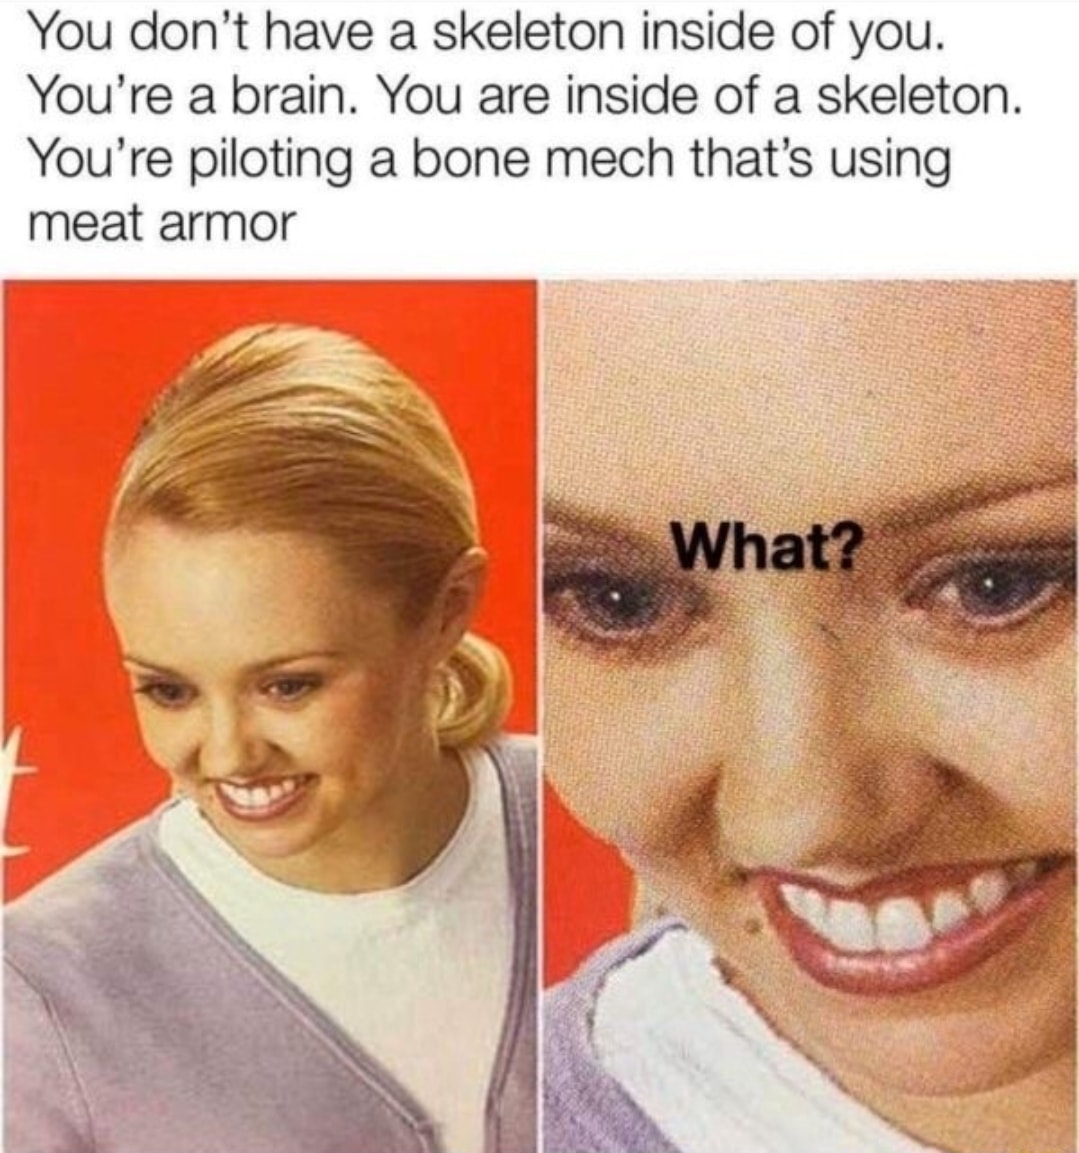 you don't have a skeleton inside of you, you're a brain, you are inside of a skeleton, you're piloting a bone mech that's using meat armor